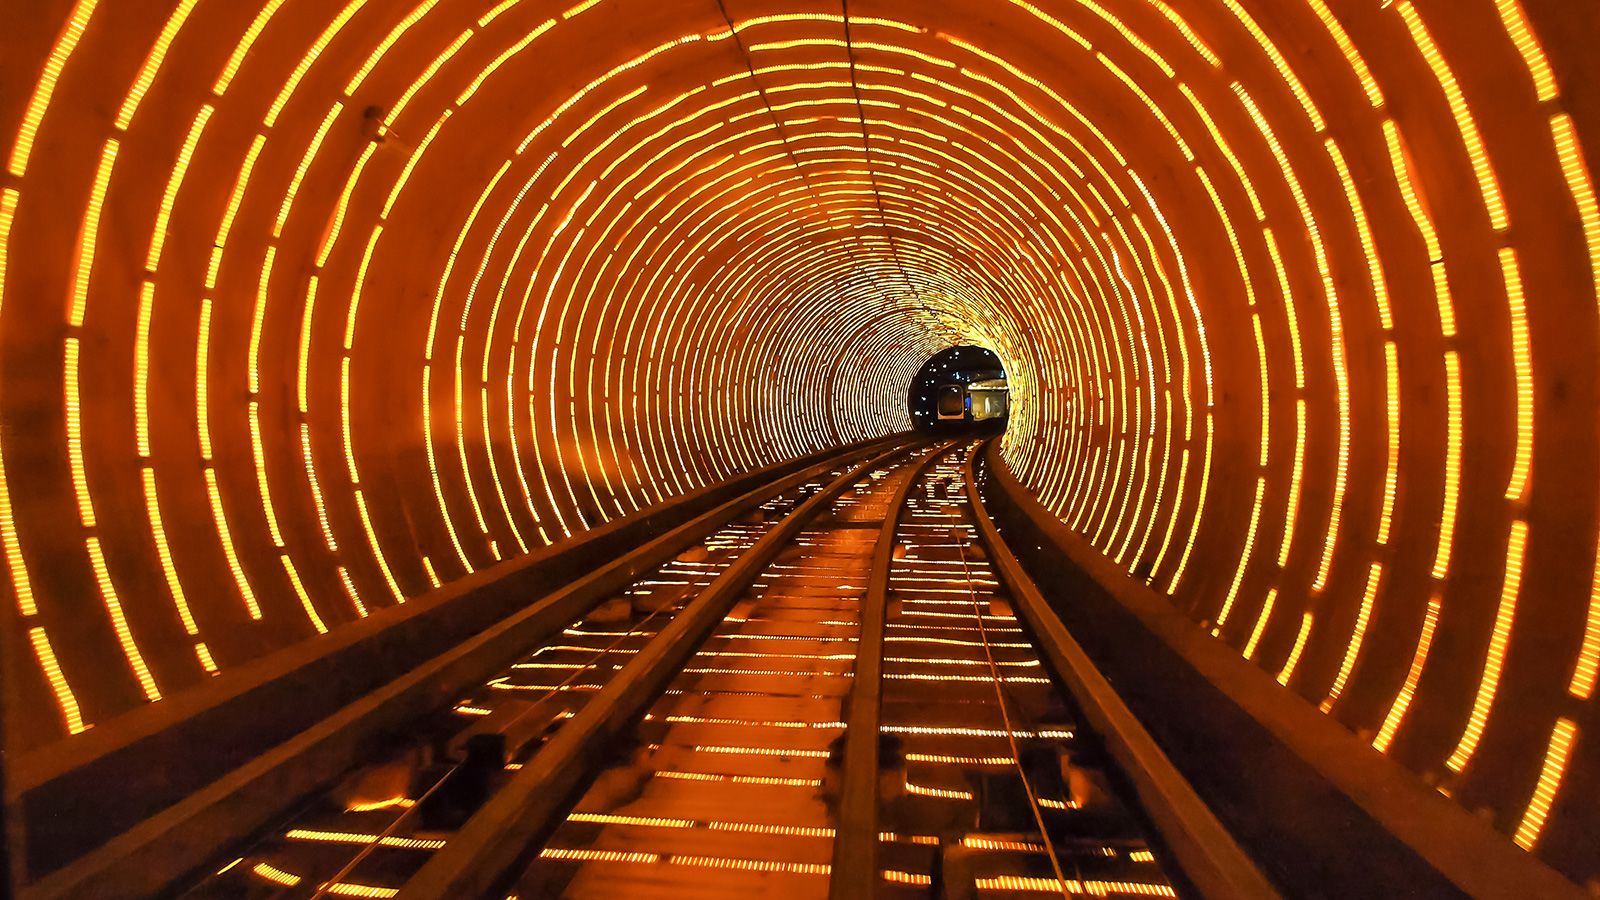 The incredible tunnels pushing deep below the surface